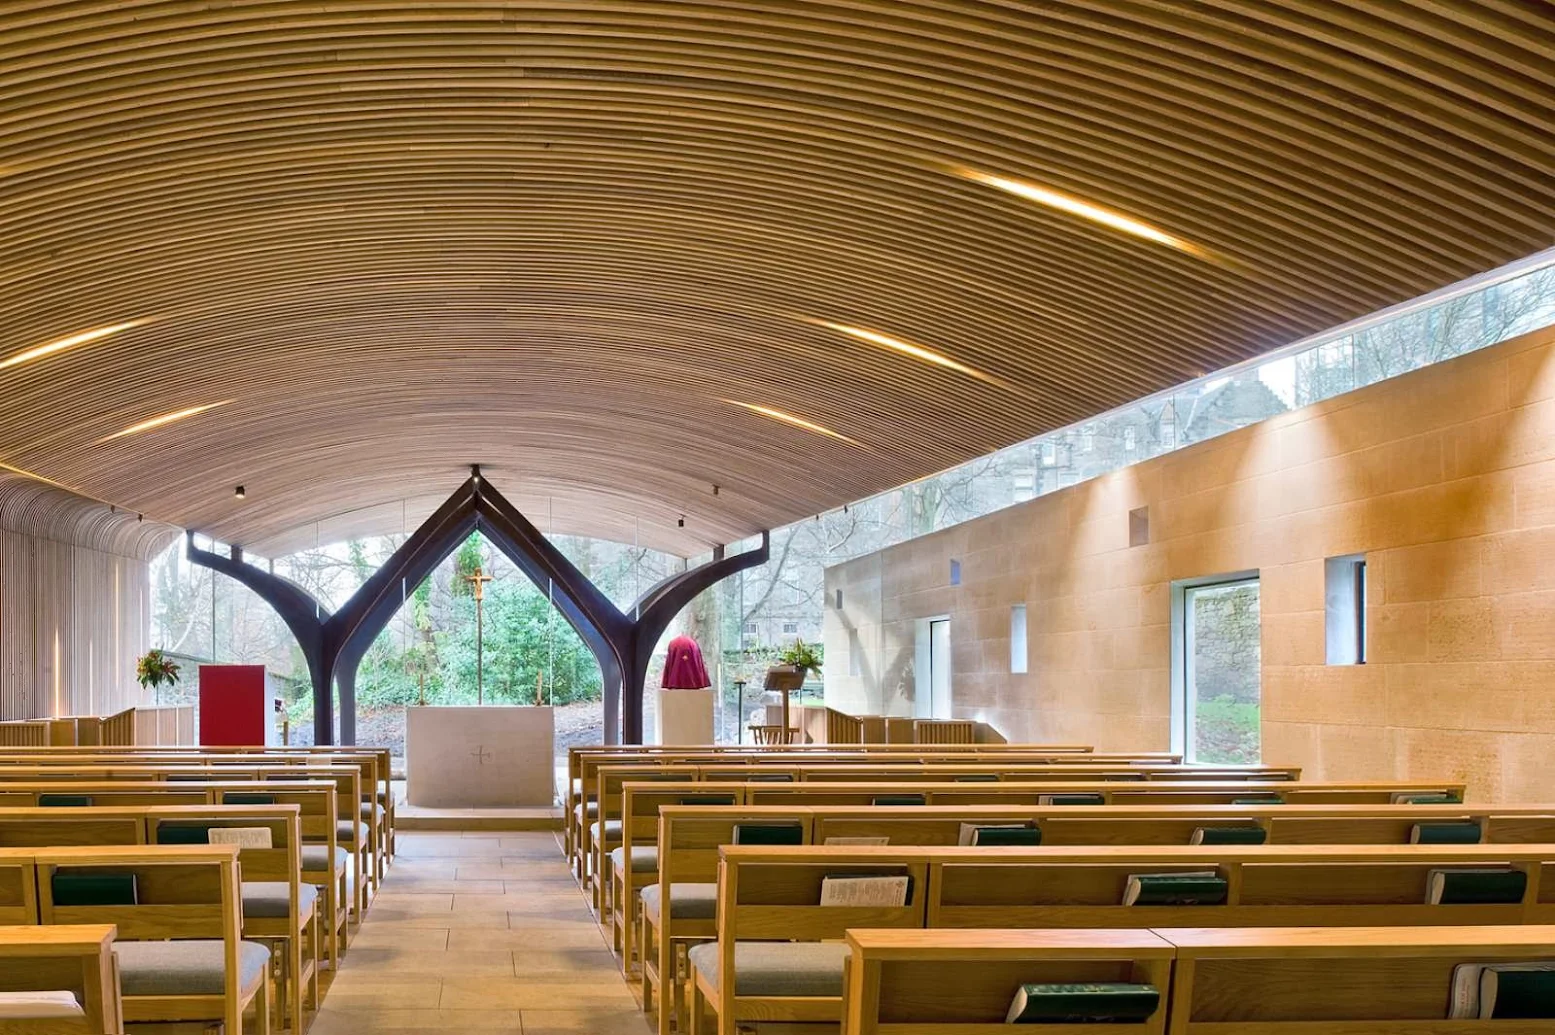 09-Chapel-of-Saint-Albert-the-Great-by-Simpson-&-Brown-Architects